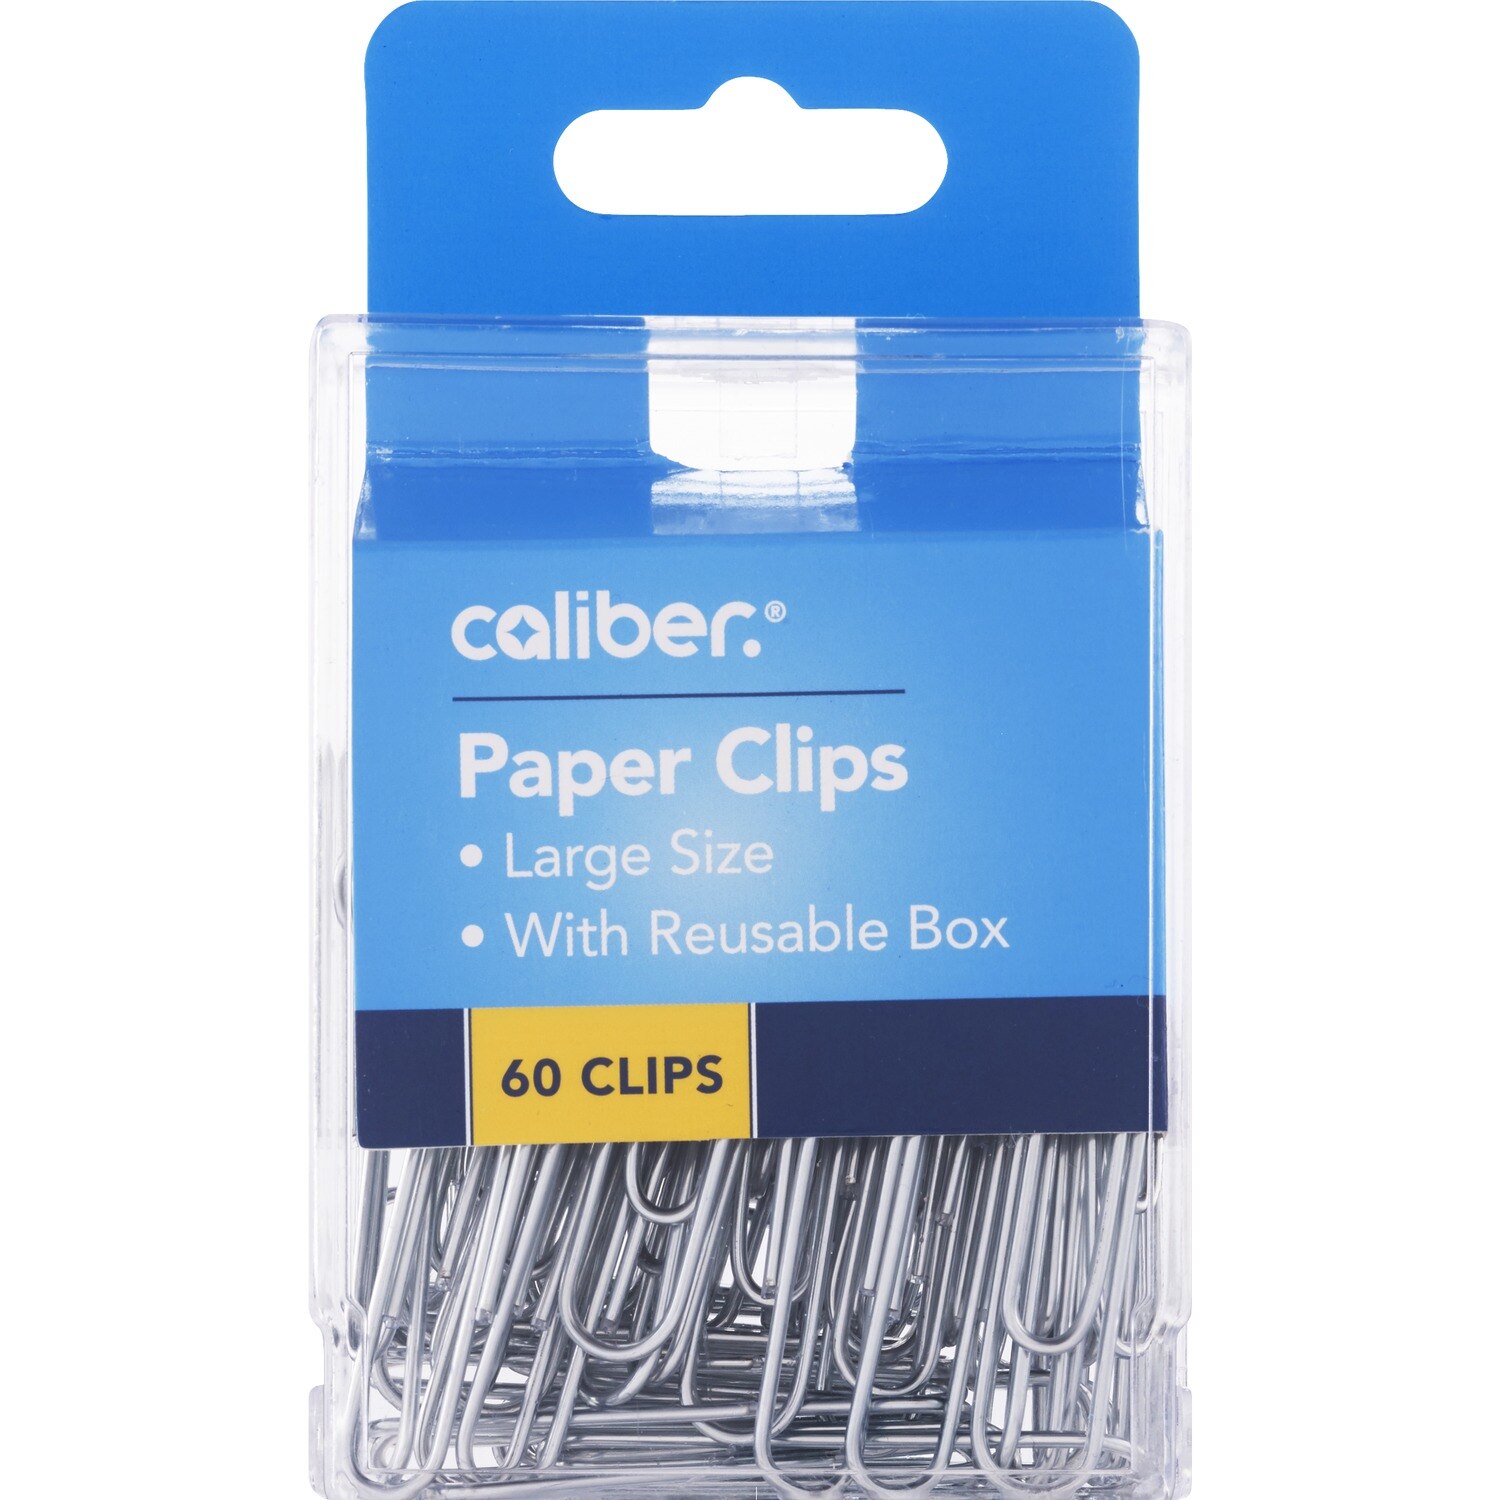 Caliber Paper Clips, Large